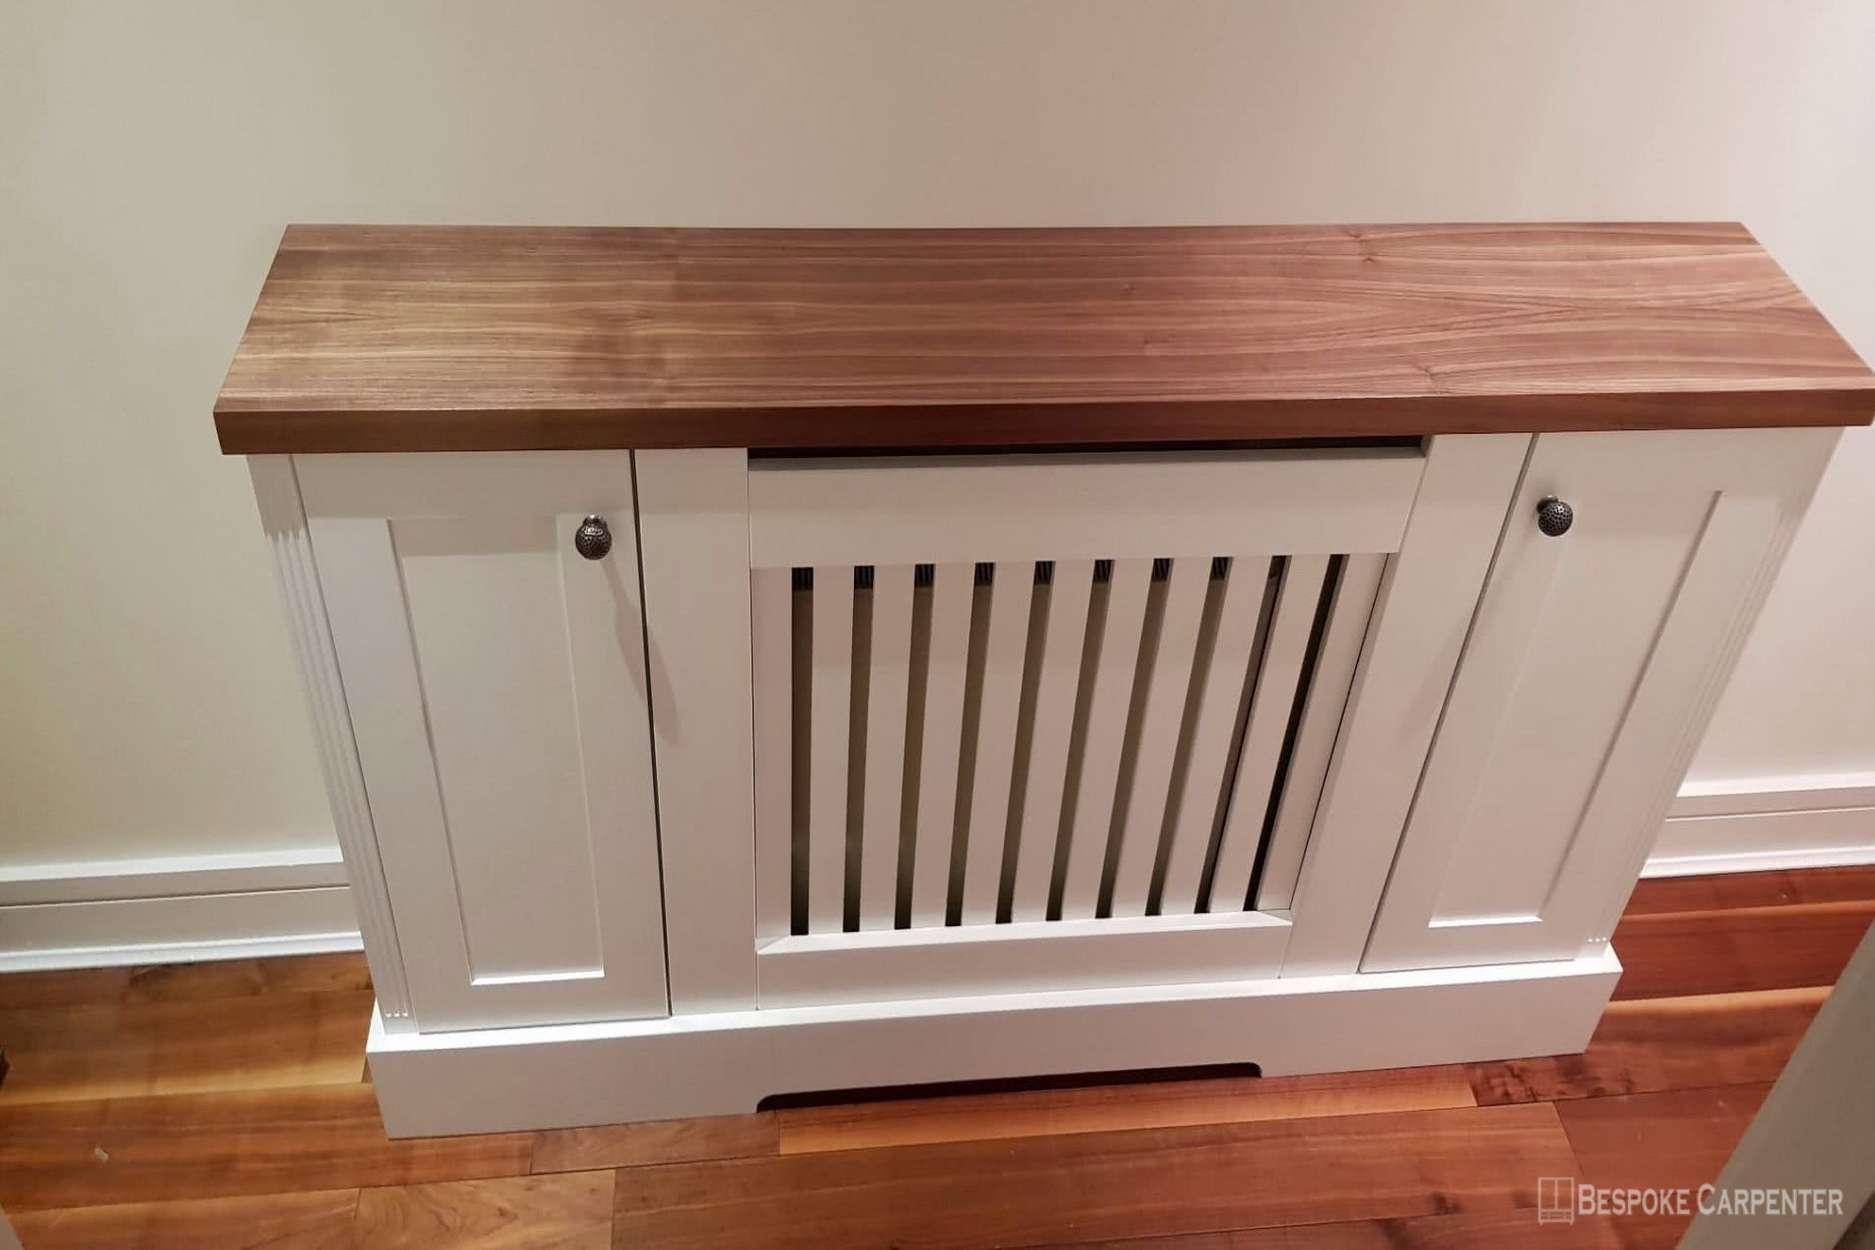 Bespoke wooden furniture made in City of London